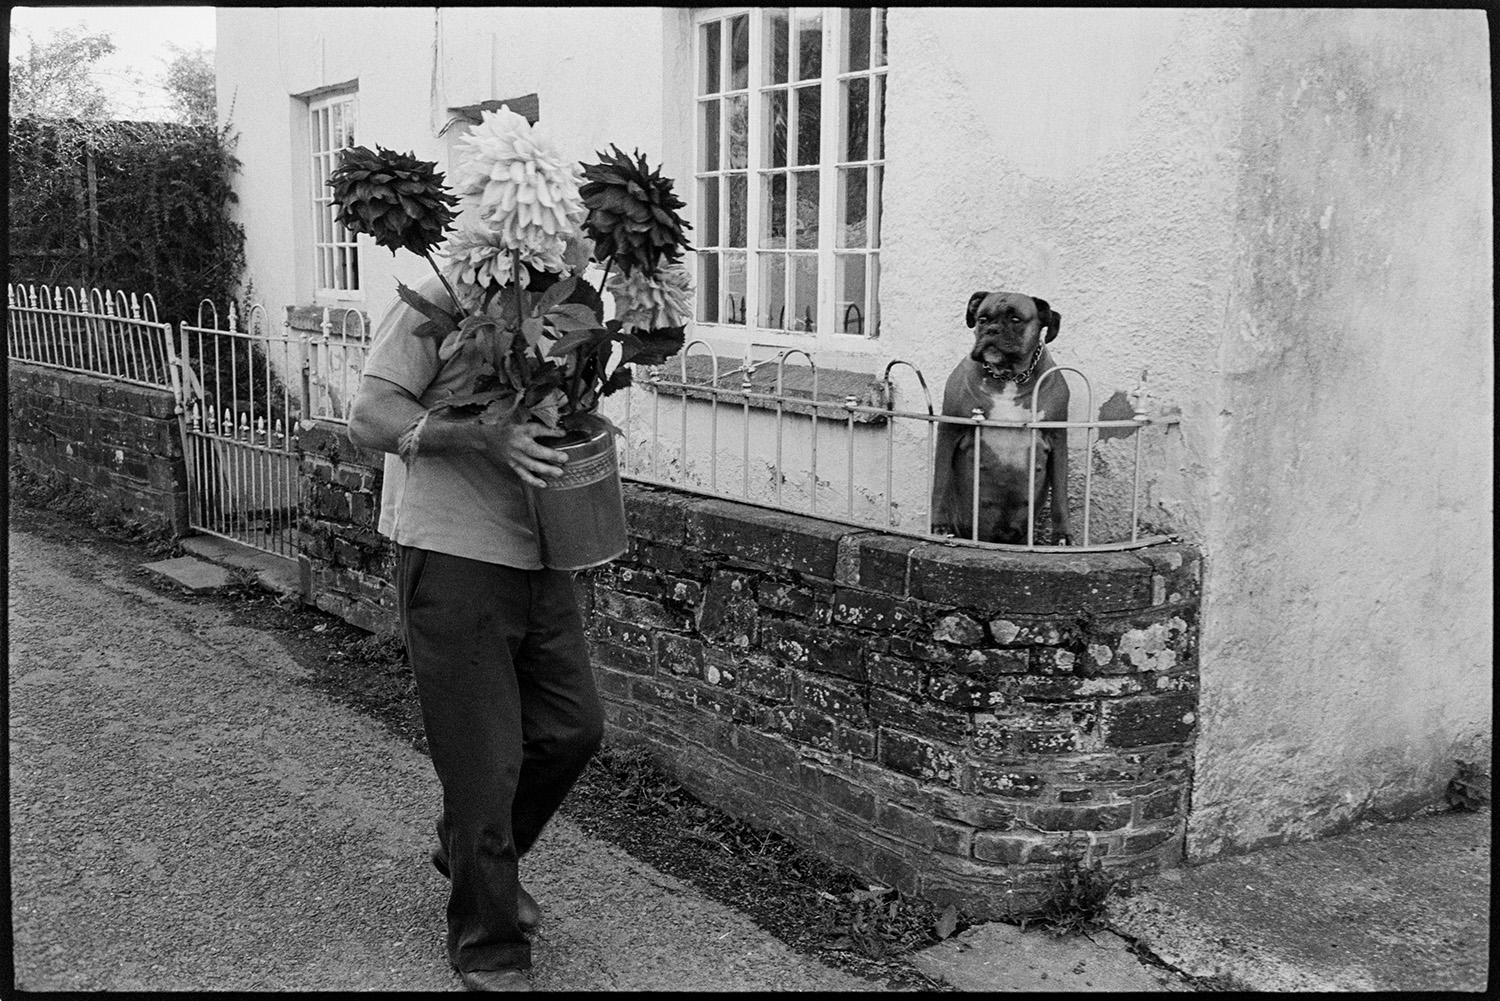 Preparing vegetables and flowers, flower show, boot of car with vegetables, chrysanthemums. 
[Michael Mitchel carrying a vase of Dahlias along Aller Road in Dolton to the Dolton Flower Show. He is passing a house with a dog outside behind railings.]